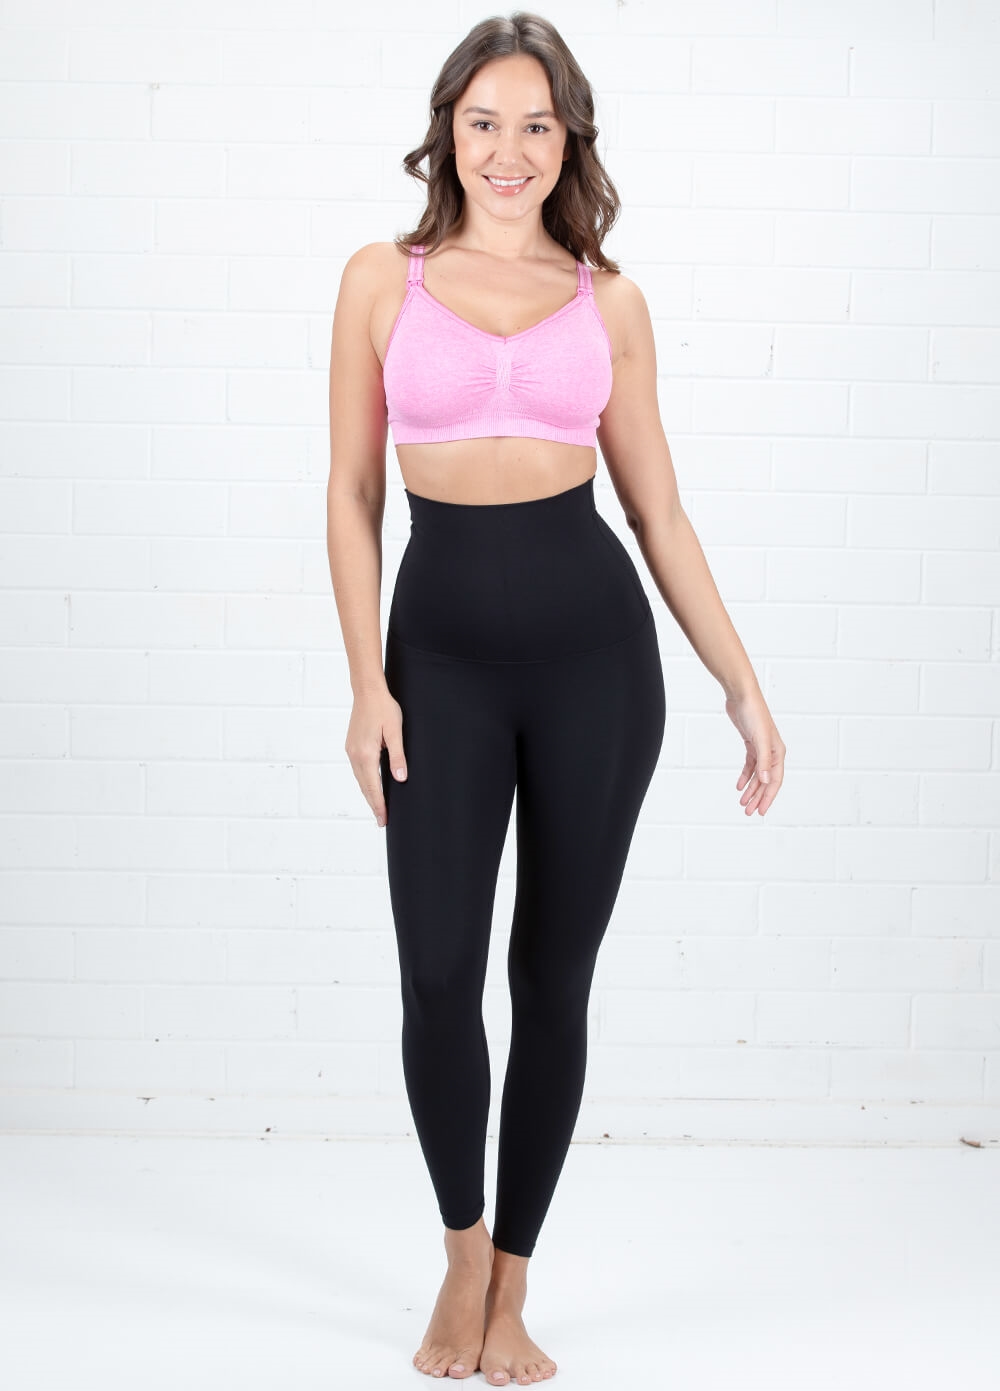 Queen Bee - Jenna High Waist Active Shaping Tights in Black